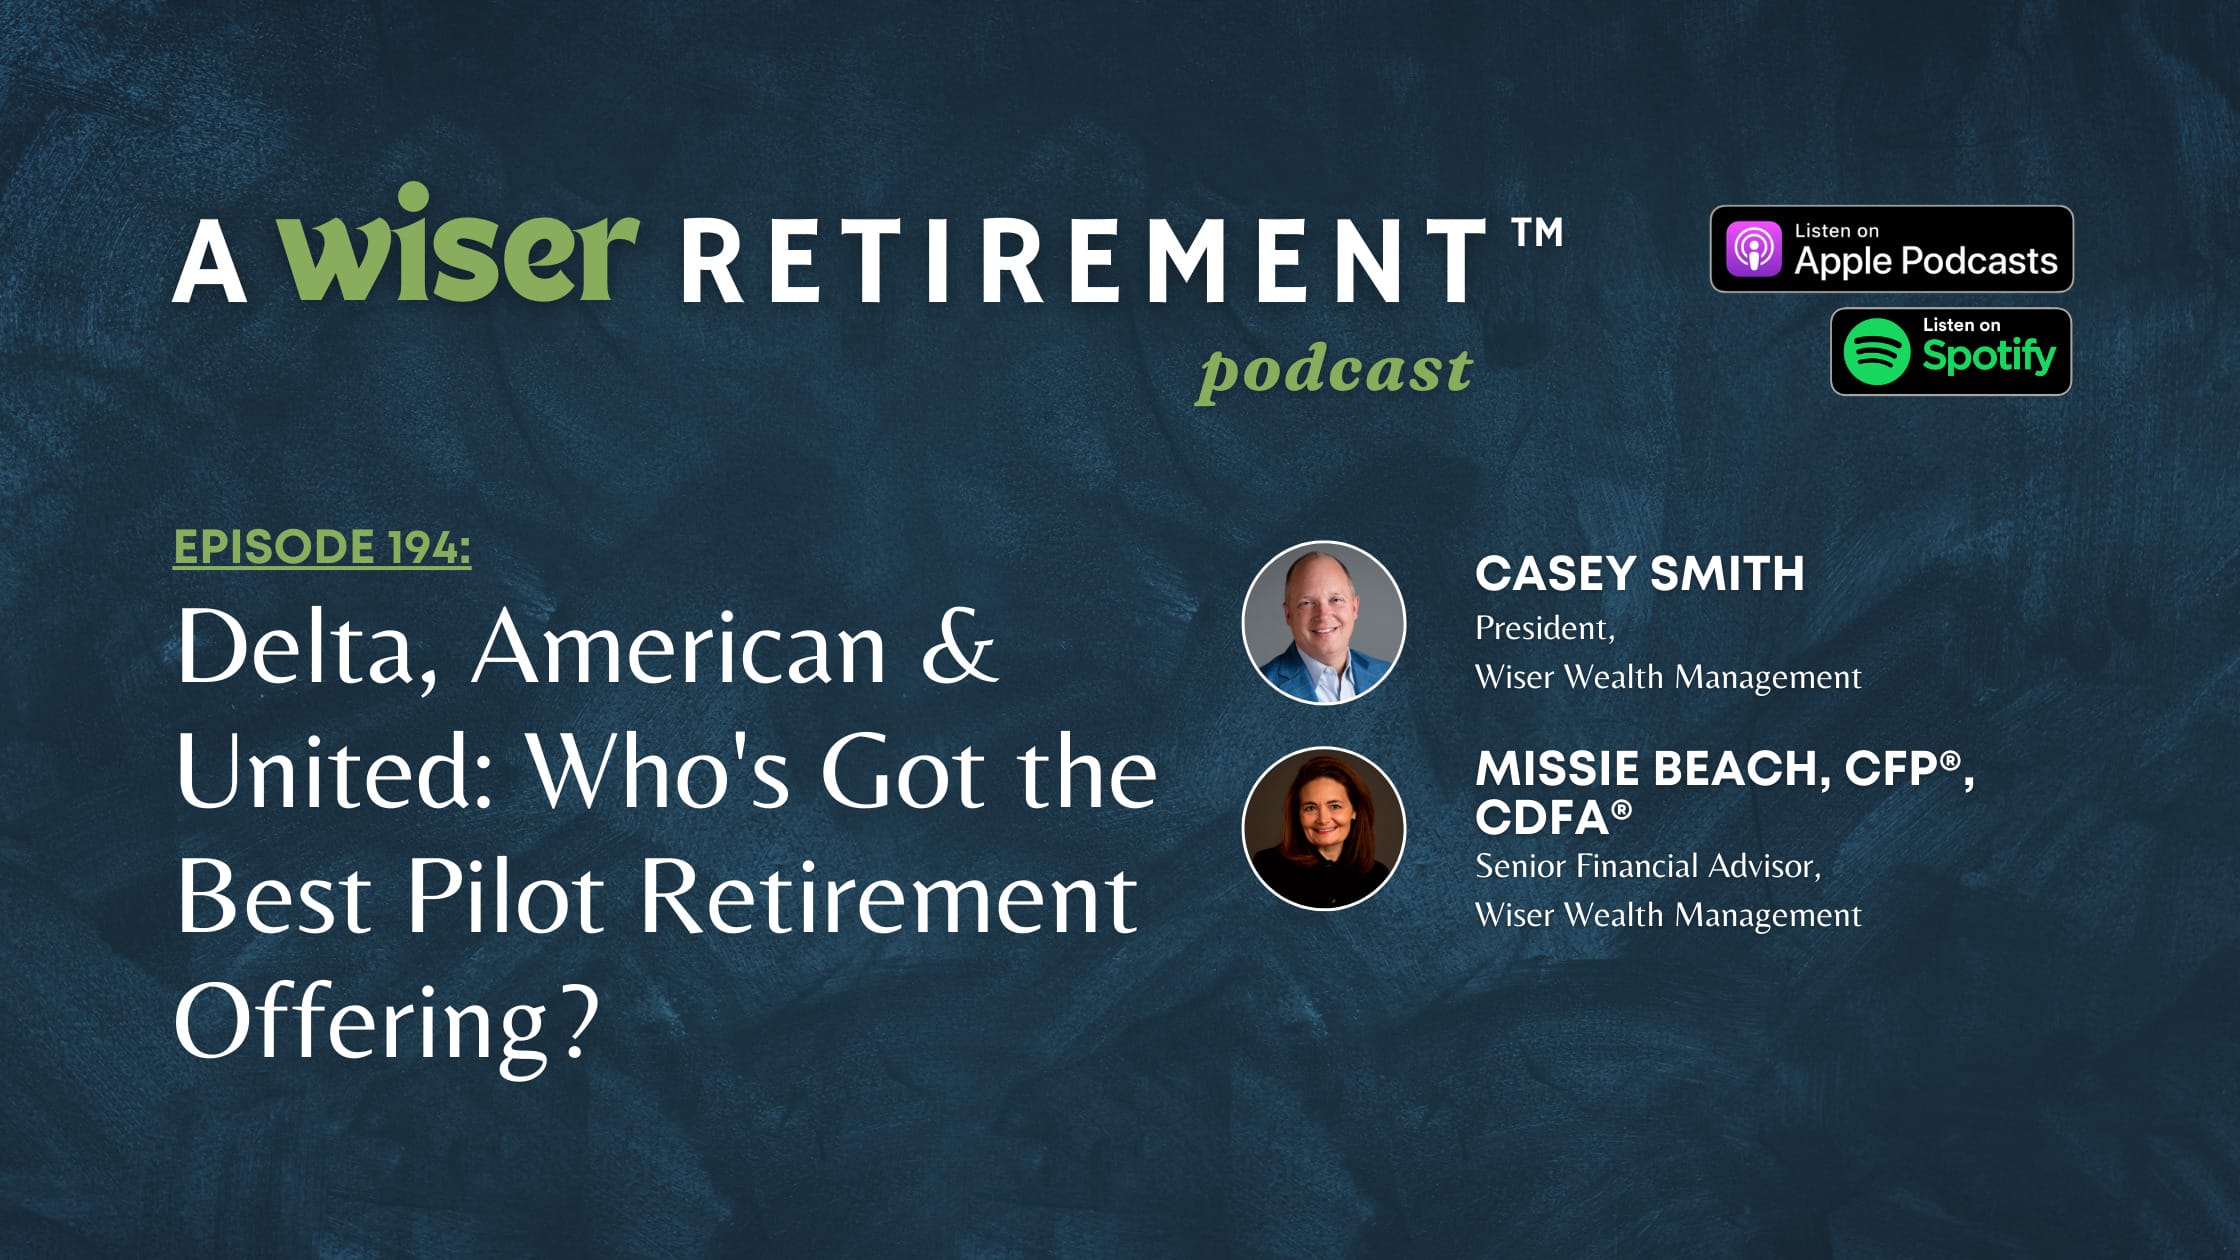 Delta, American & United: Who's Got the Best Pilot Retirement Offering?